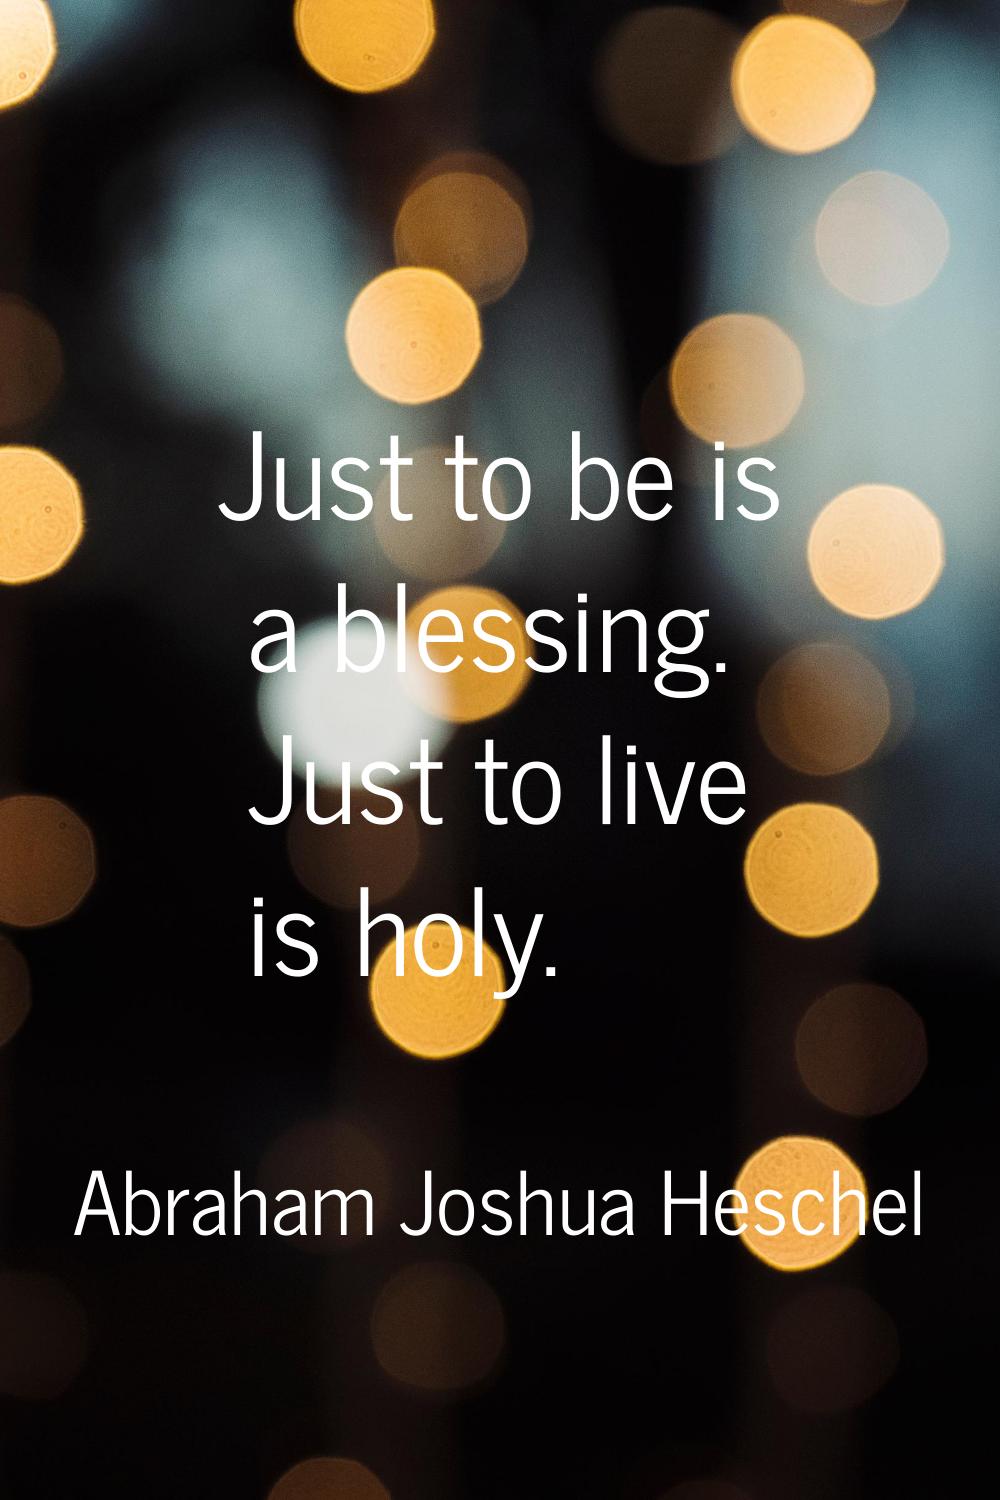 Just to be is a blessing. Just to live is holy.